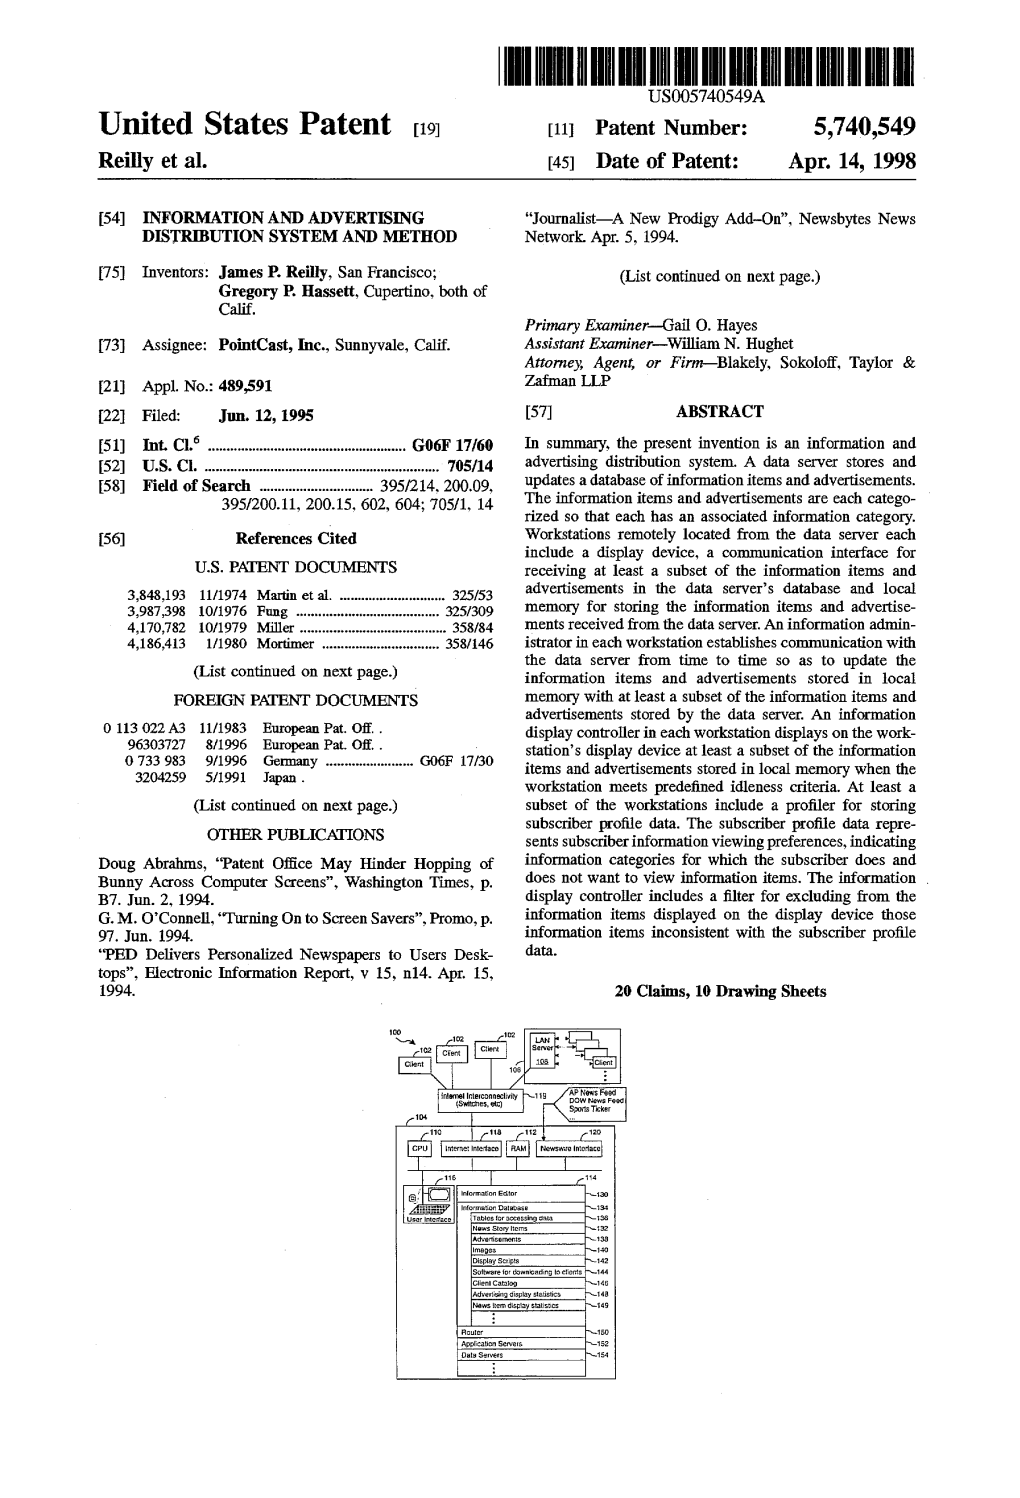 United States Patent 19 11 Patent Number: 5,740,549 Reilly Et Al